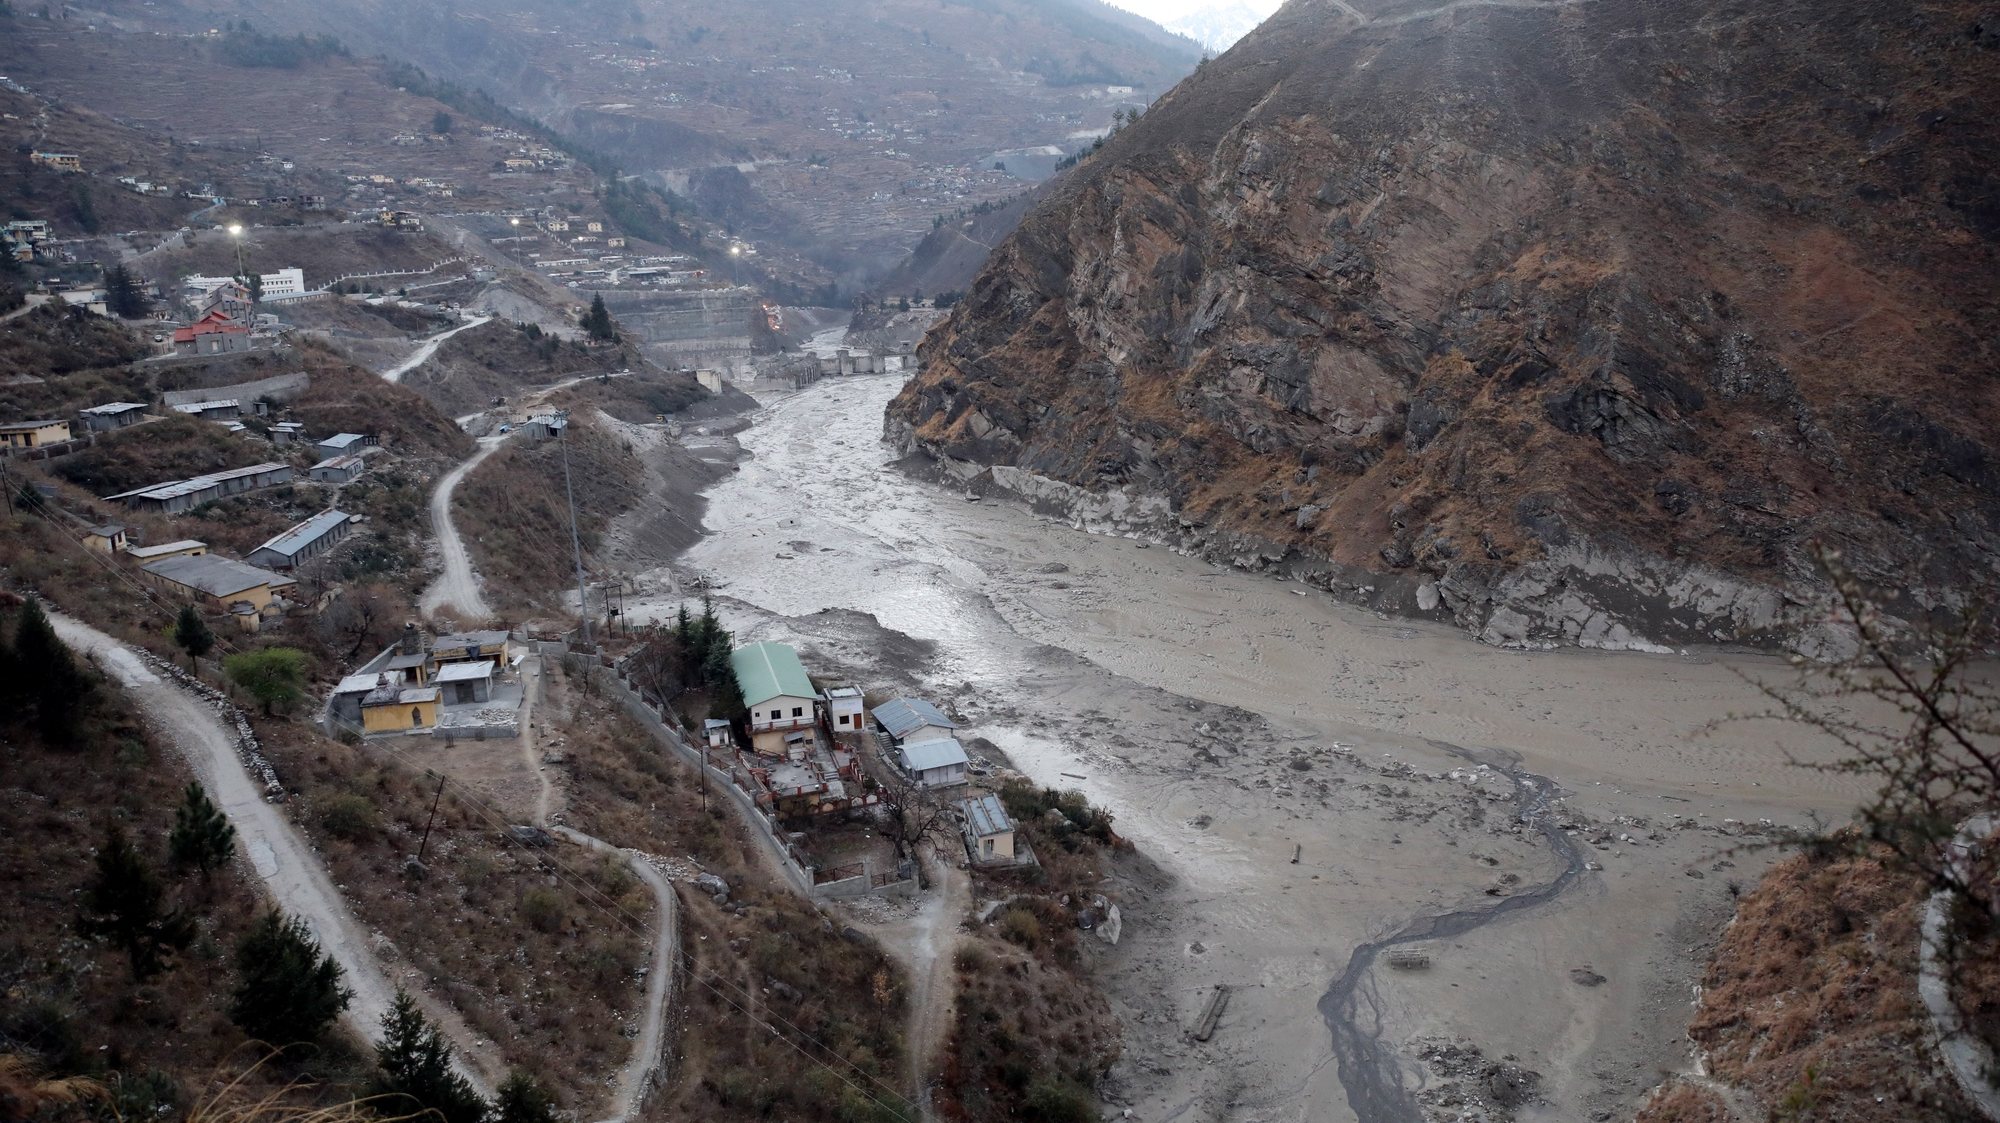 epa08996434 A general view of an area near the Dhauliganga hydro power project after a portion of Nanda Devi glacier broke off, at Reni village in Chamoli district, Uttrakhand, India 08 February 2021. At least 19 people died and nearly 150 are still missing after part of the Nanda Devi glacier fell into the river, triggering a flood that burst open a dam in the Tapovan area of Uttarakhand&#039;s Chamoli district on 07 February 2021.  EPA/RAJAT GUPTA